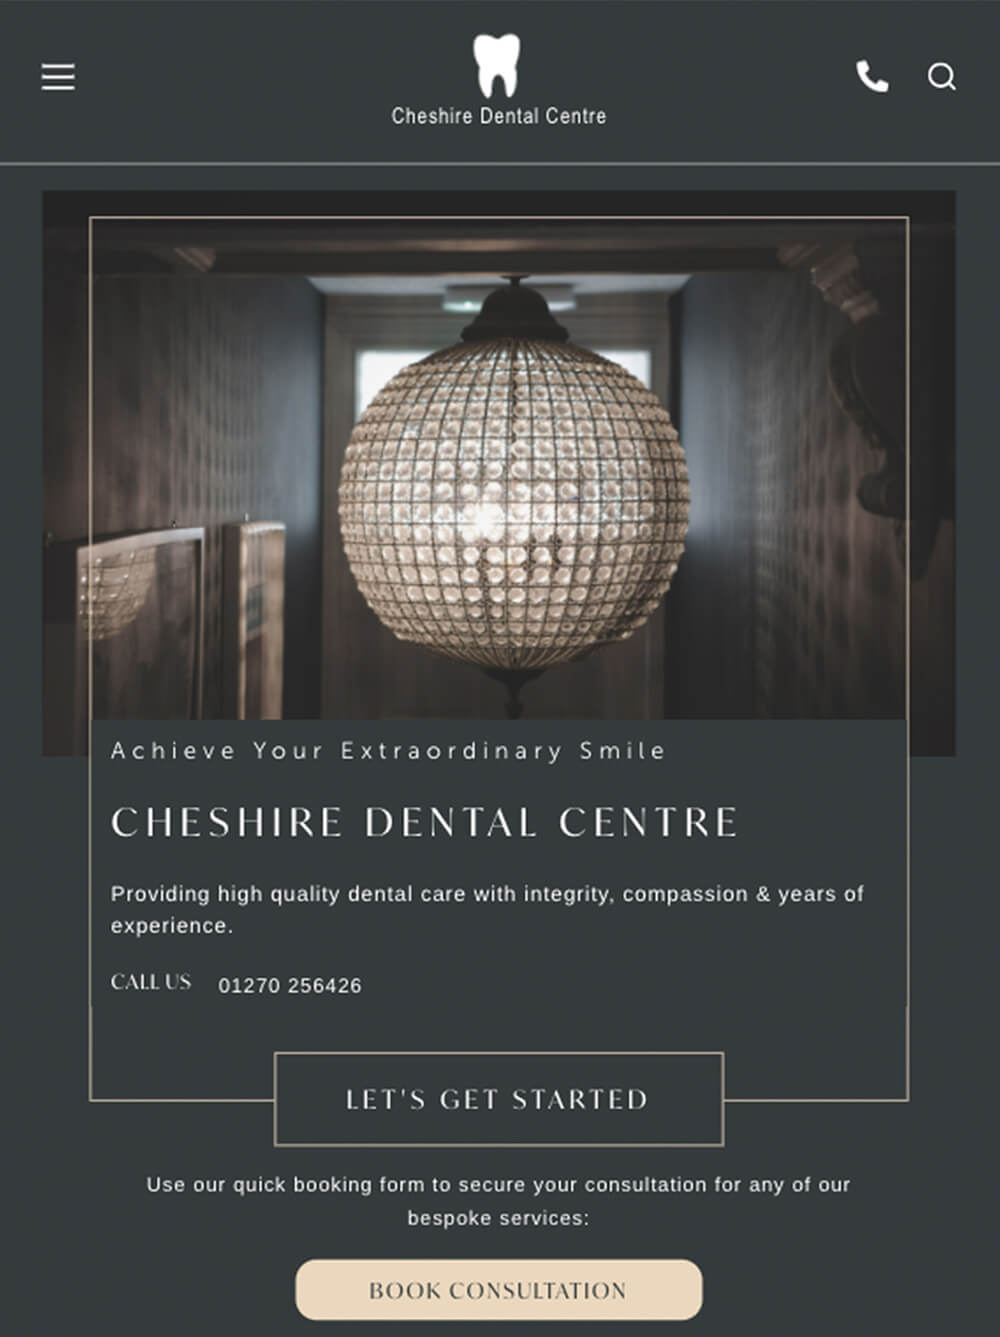 cheshire-dental-image-two